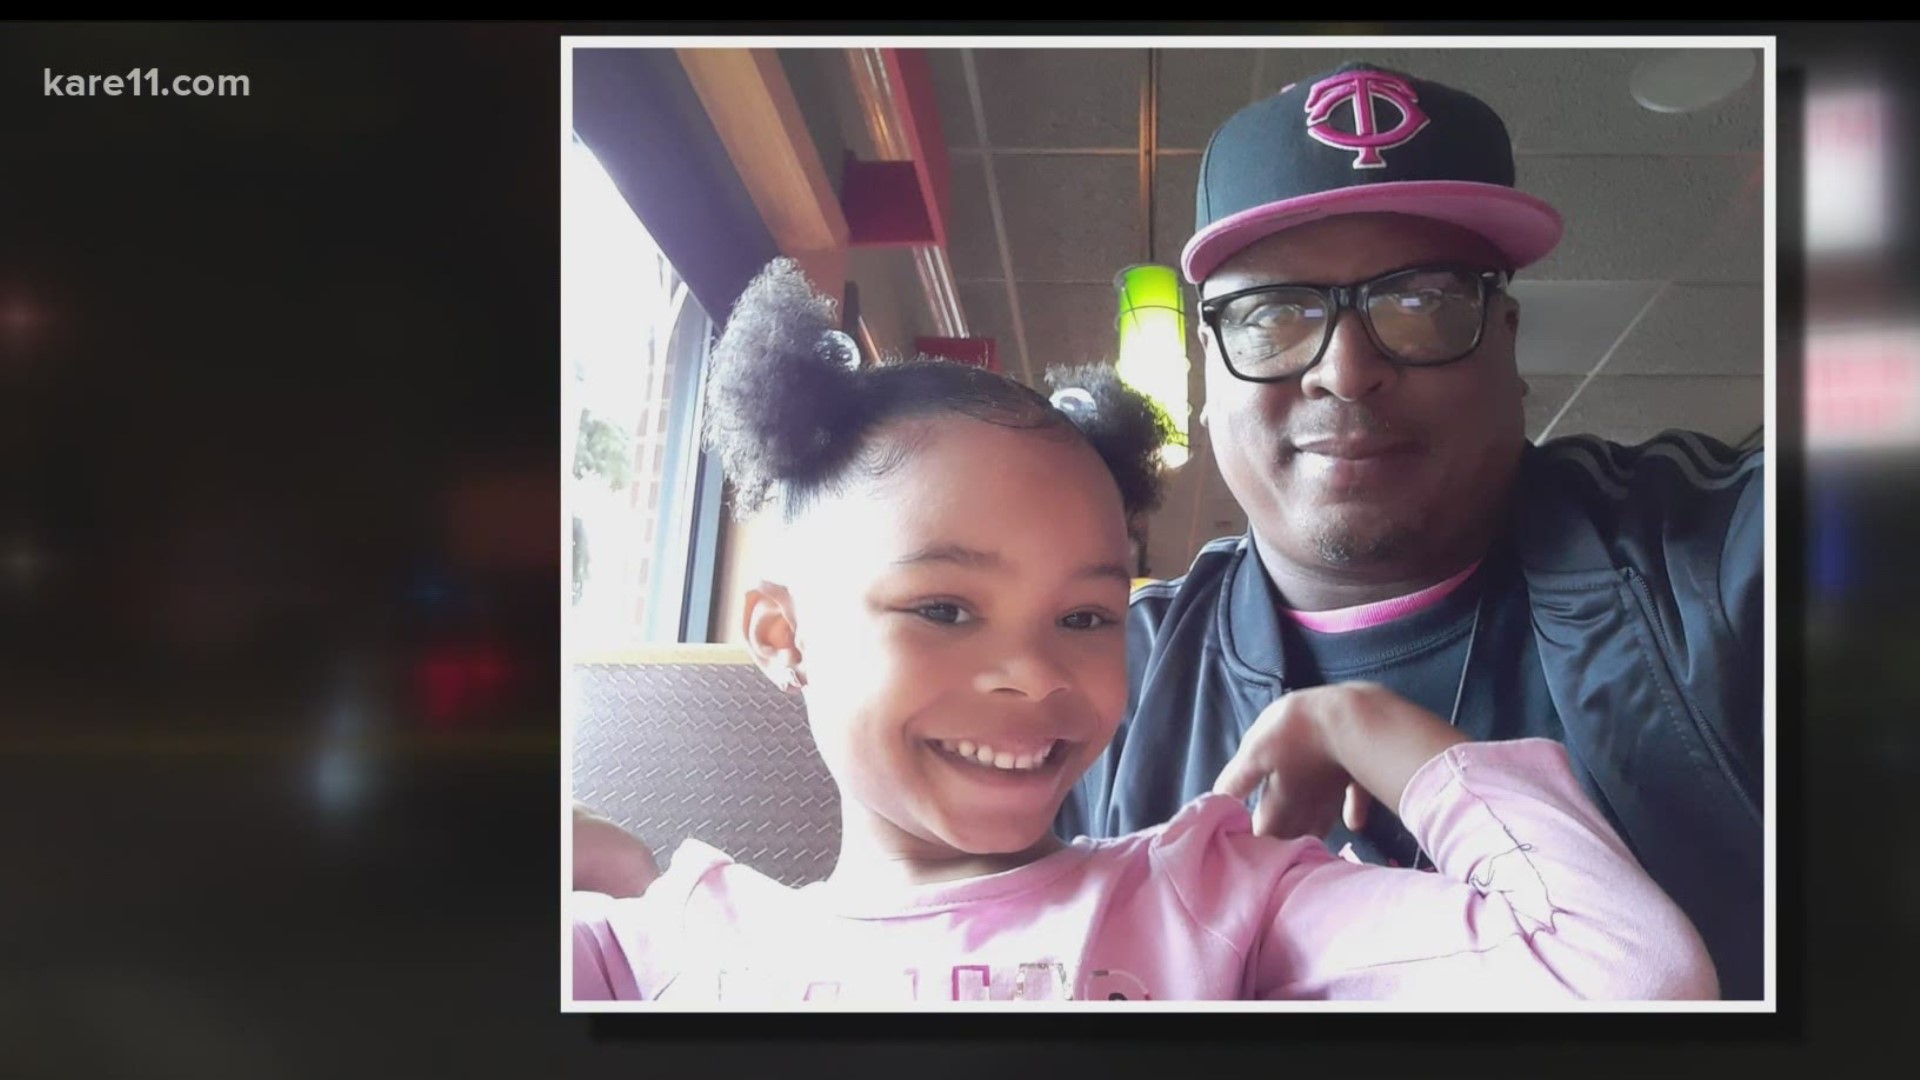 Police say the child, identified by Wilson as Aniya Allen, was shot and critically injured in the city Monday night, the third in just a matter of weeks.